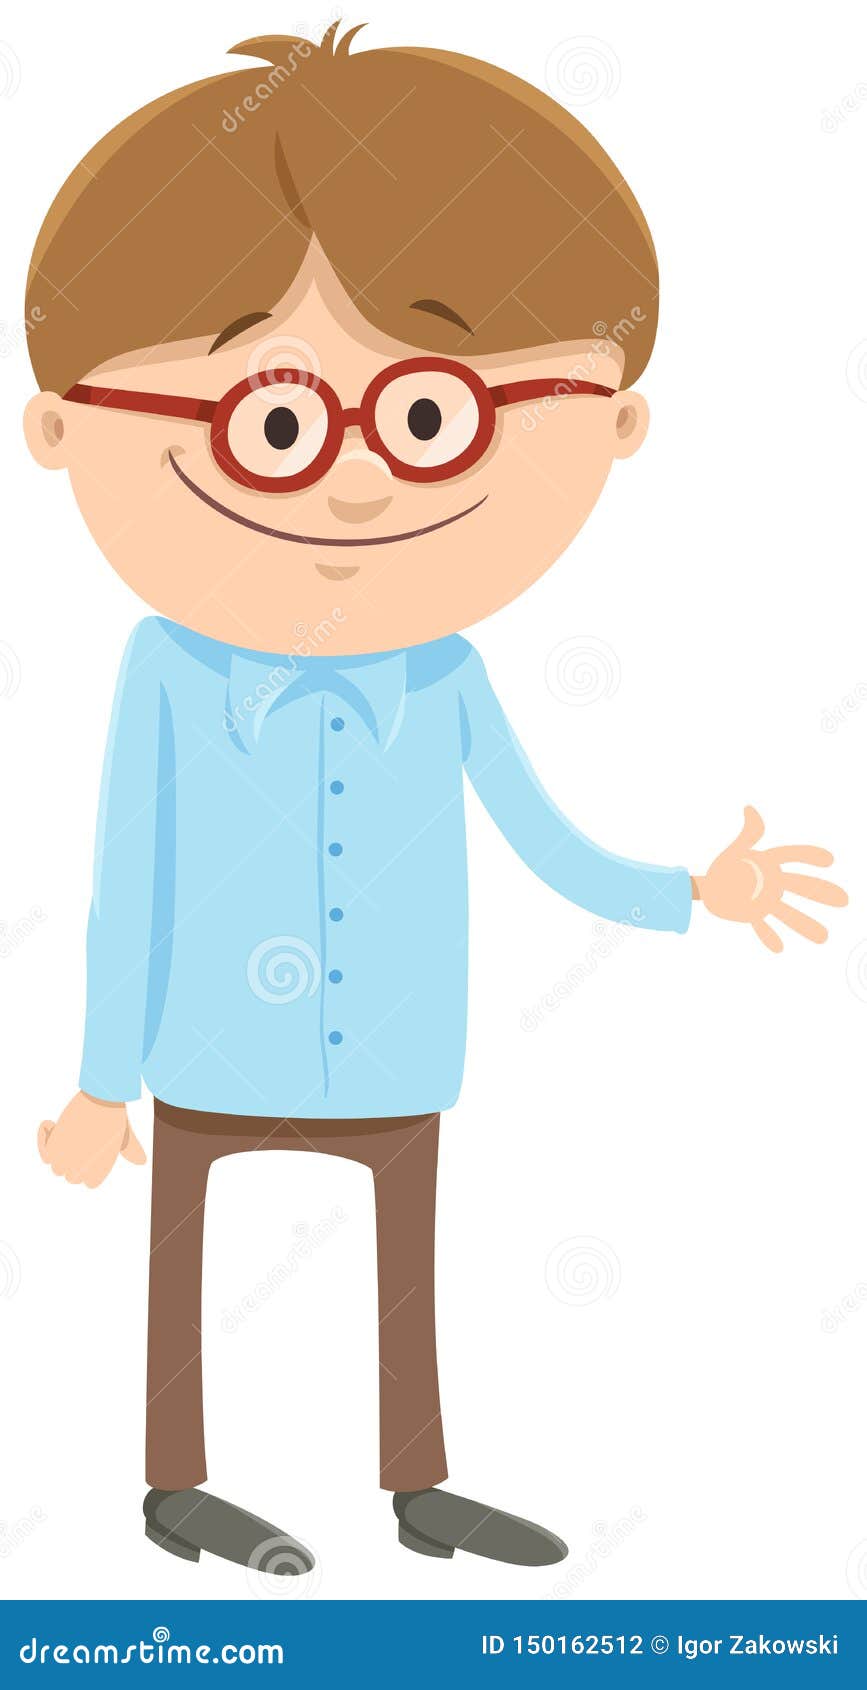 Happy Boy Cartoon Character with Glasses Stock Vector - Illustration of  design, glasses: 150162512